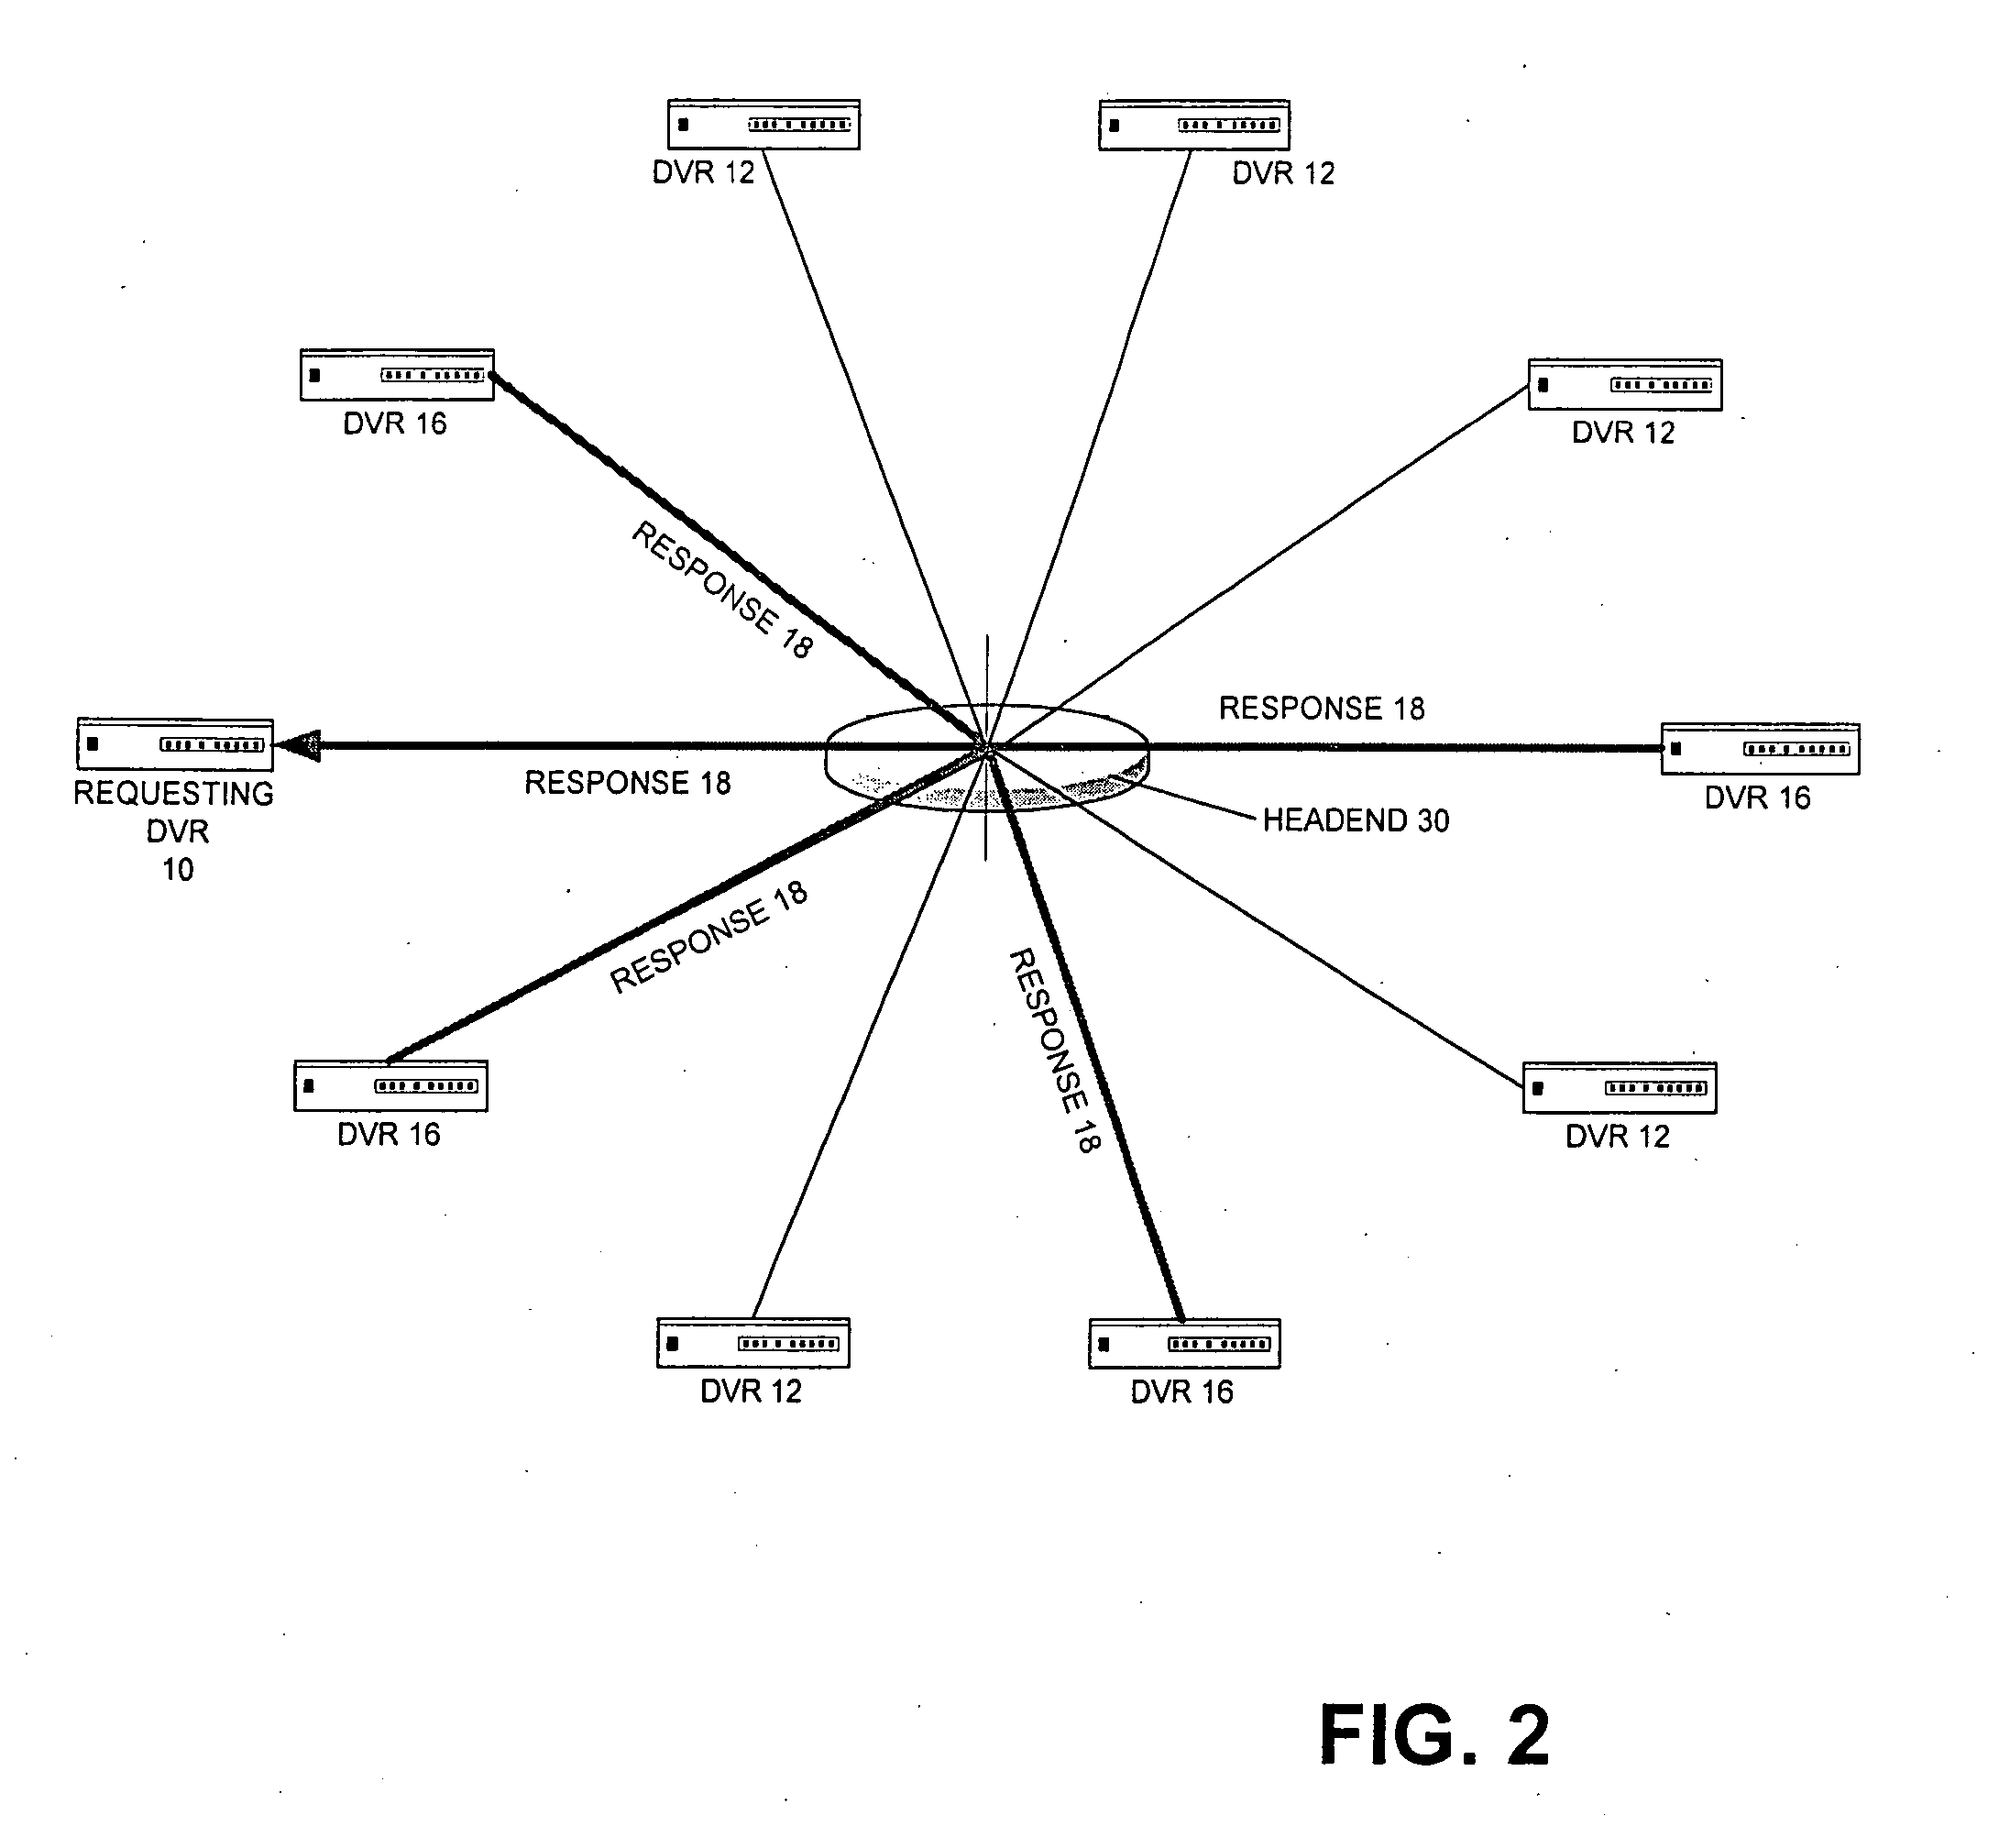 Multi-device distributed digital video recording systems and methods